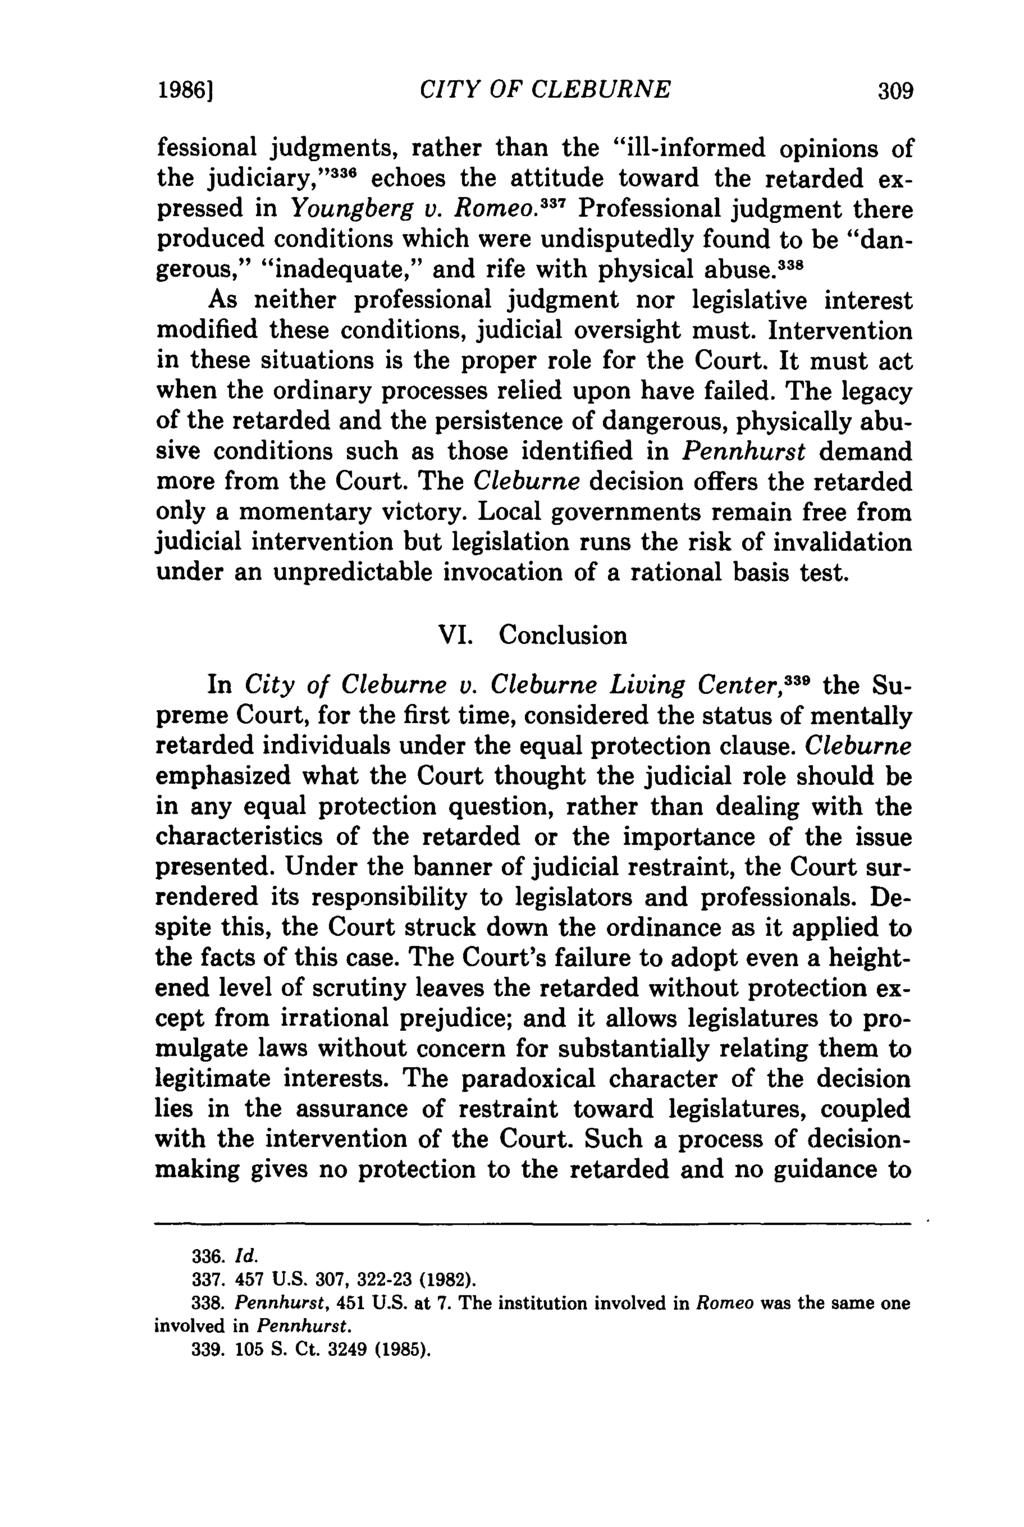 1986] CITY OF CLEBURNE fessional judgments, rather than the "ill-informed opinions of the judiciary, ' '336 echoes the attitude toward the retarded expressed in Youngberg v. Romeo.